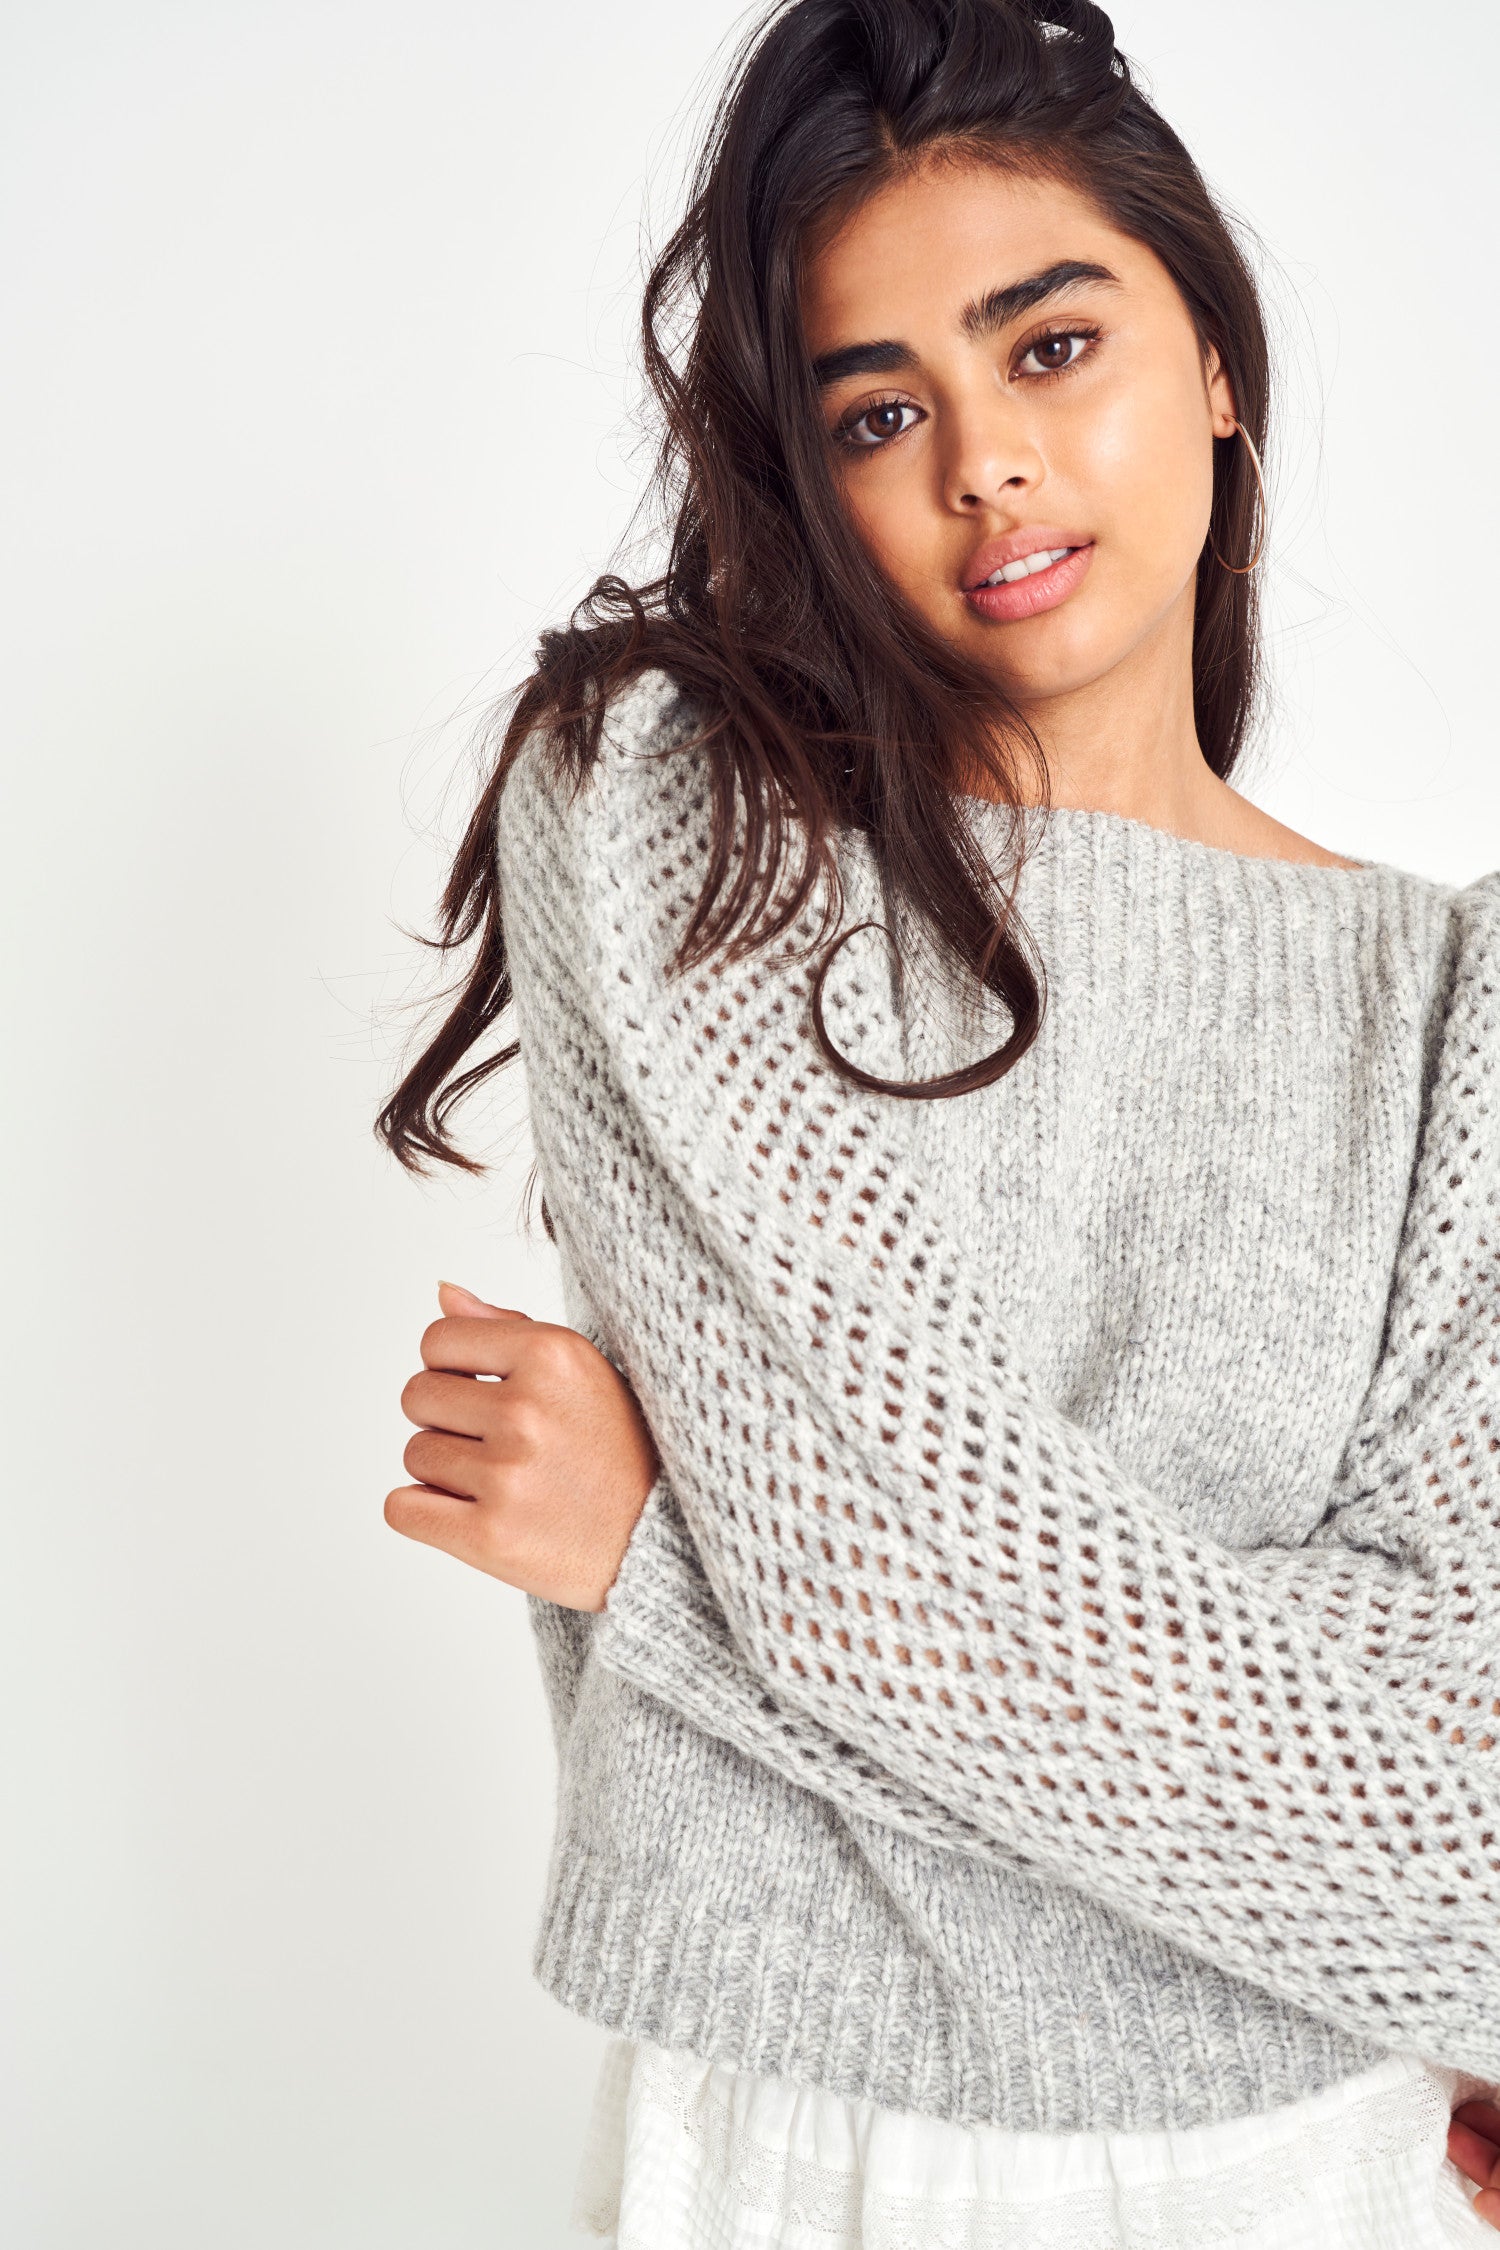 The Rosie pullover is made from baby alpaca while being extremely light and full with a chunky look. It has a straight rib neckline and a straight body with rib finishing. It is an open knit weave with a puffy shoulder that slims out at the bottom.